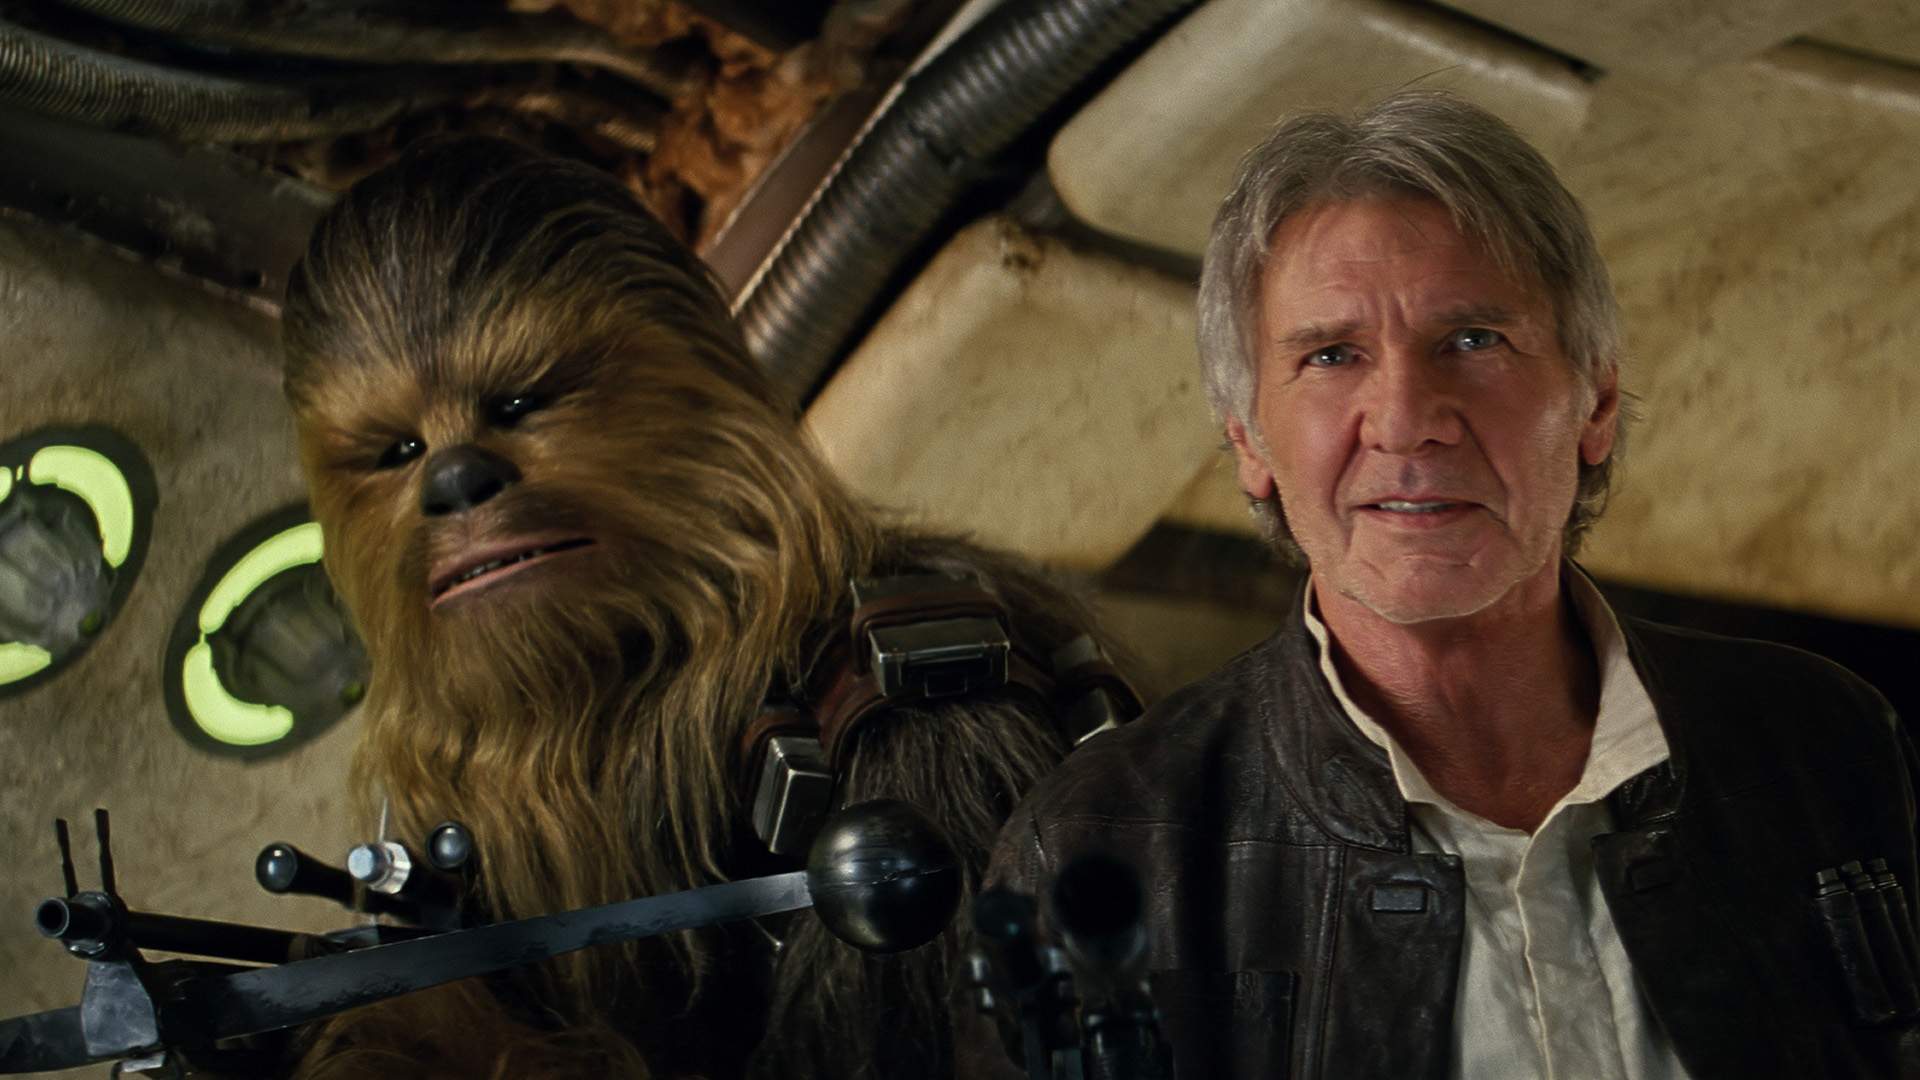 'Star Wars: The Force Awakens' in Concert